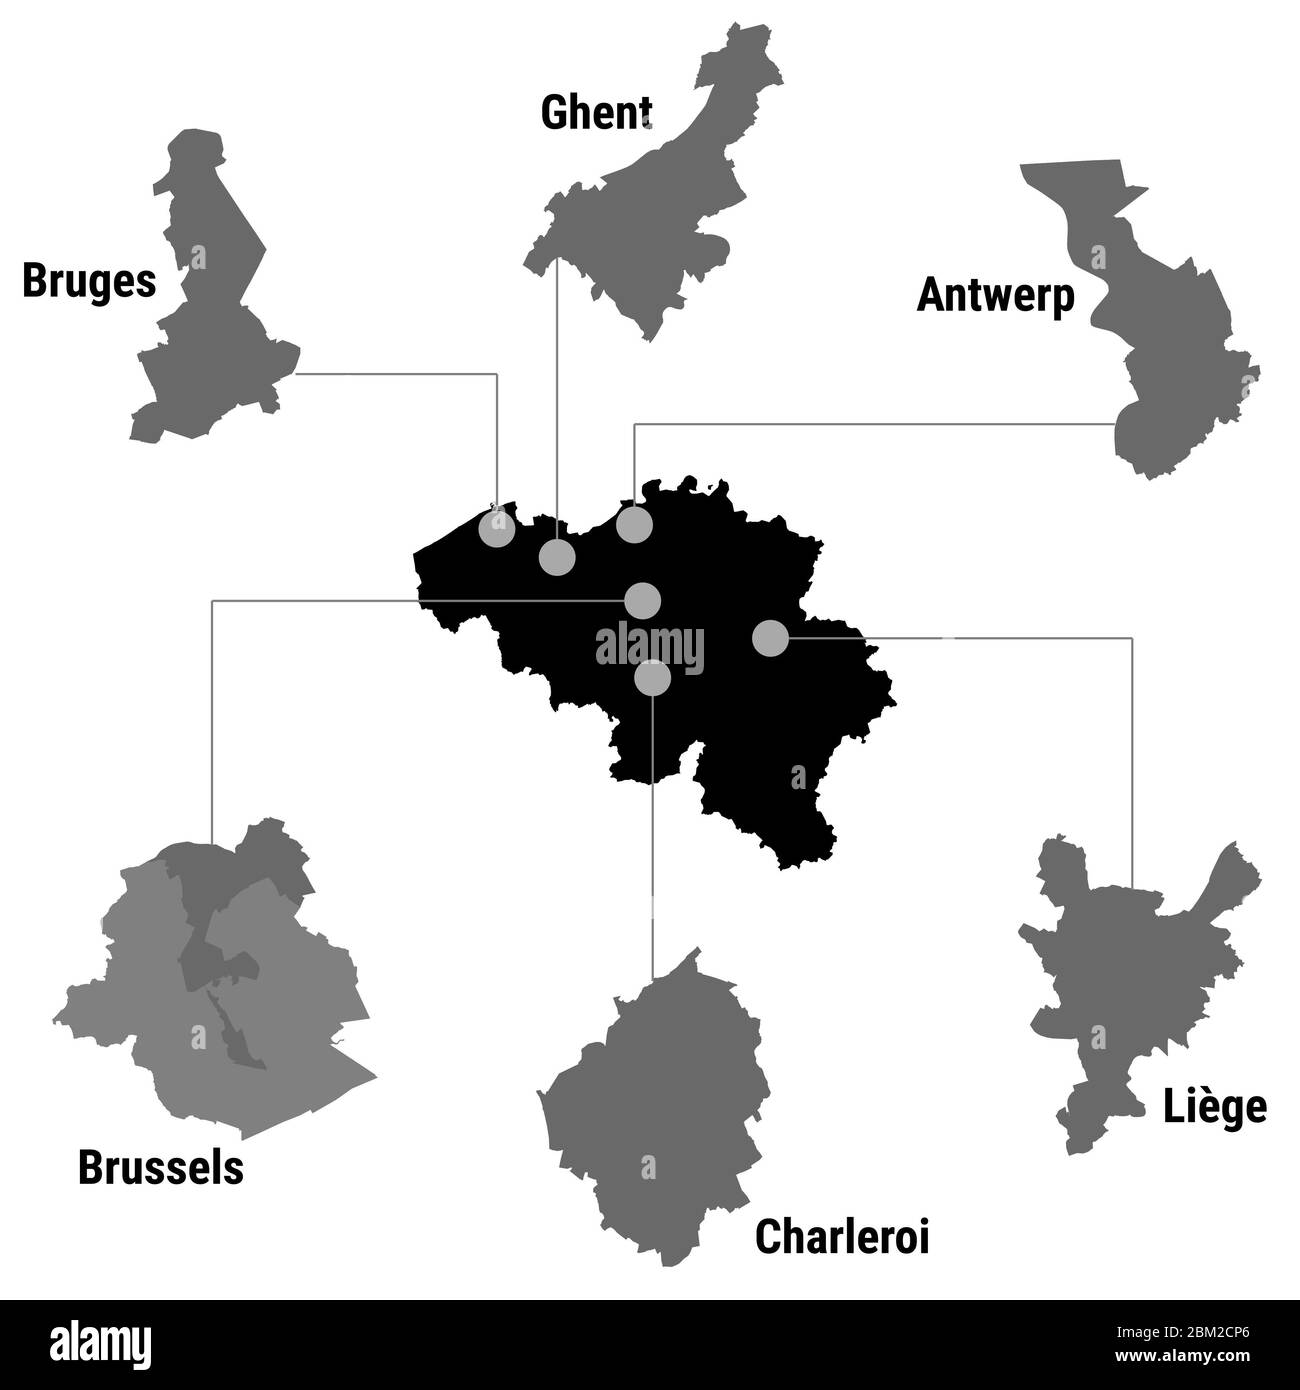 Belgium map infographic with cities Brussels Bruxelles, Liege Luik, Gent Ghent, Brugge Bruges, Charleroi, Antwerp Antwerpen grey on white background Stock Photo